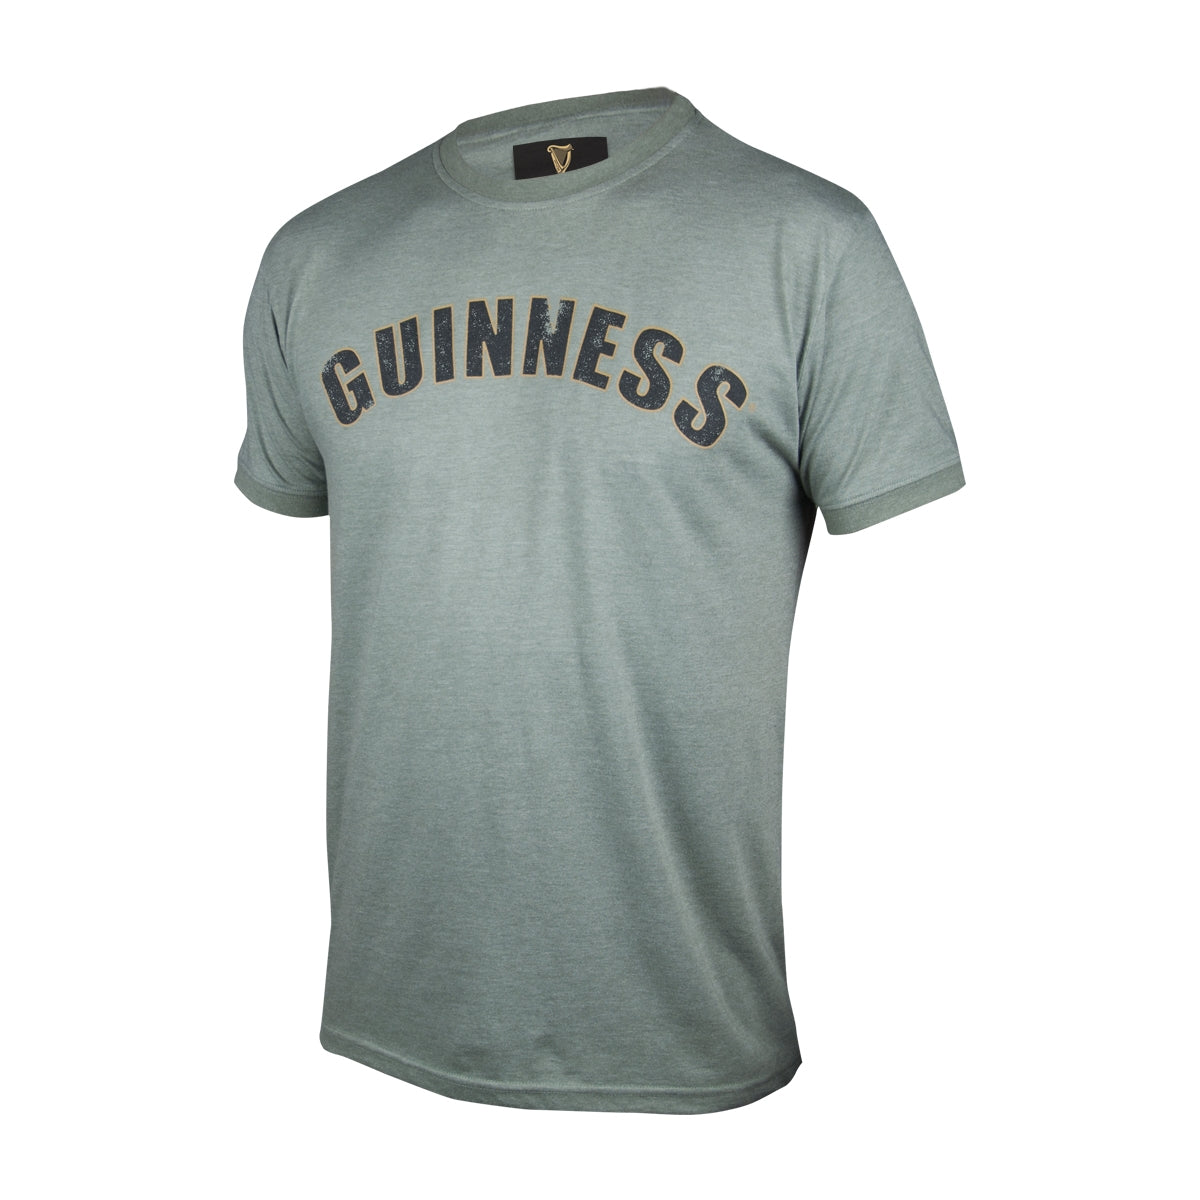 The Green Heathered Bottle Cap Tee from Guinness is green and has the word Guinness on it.